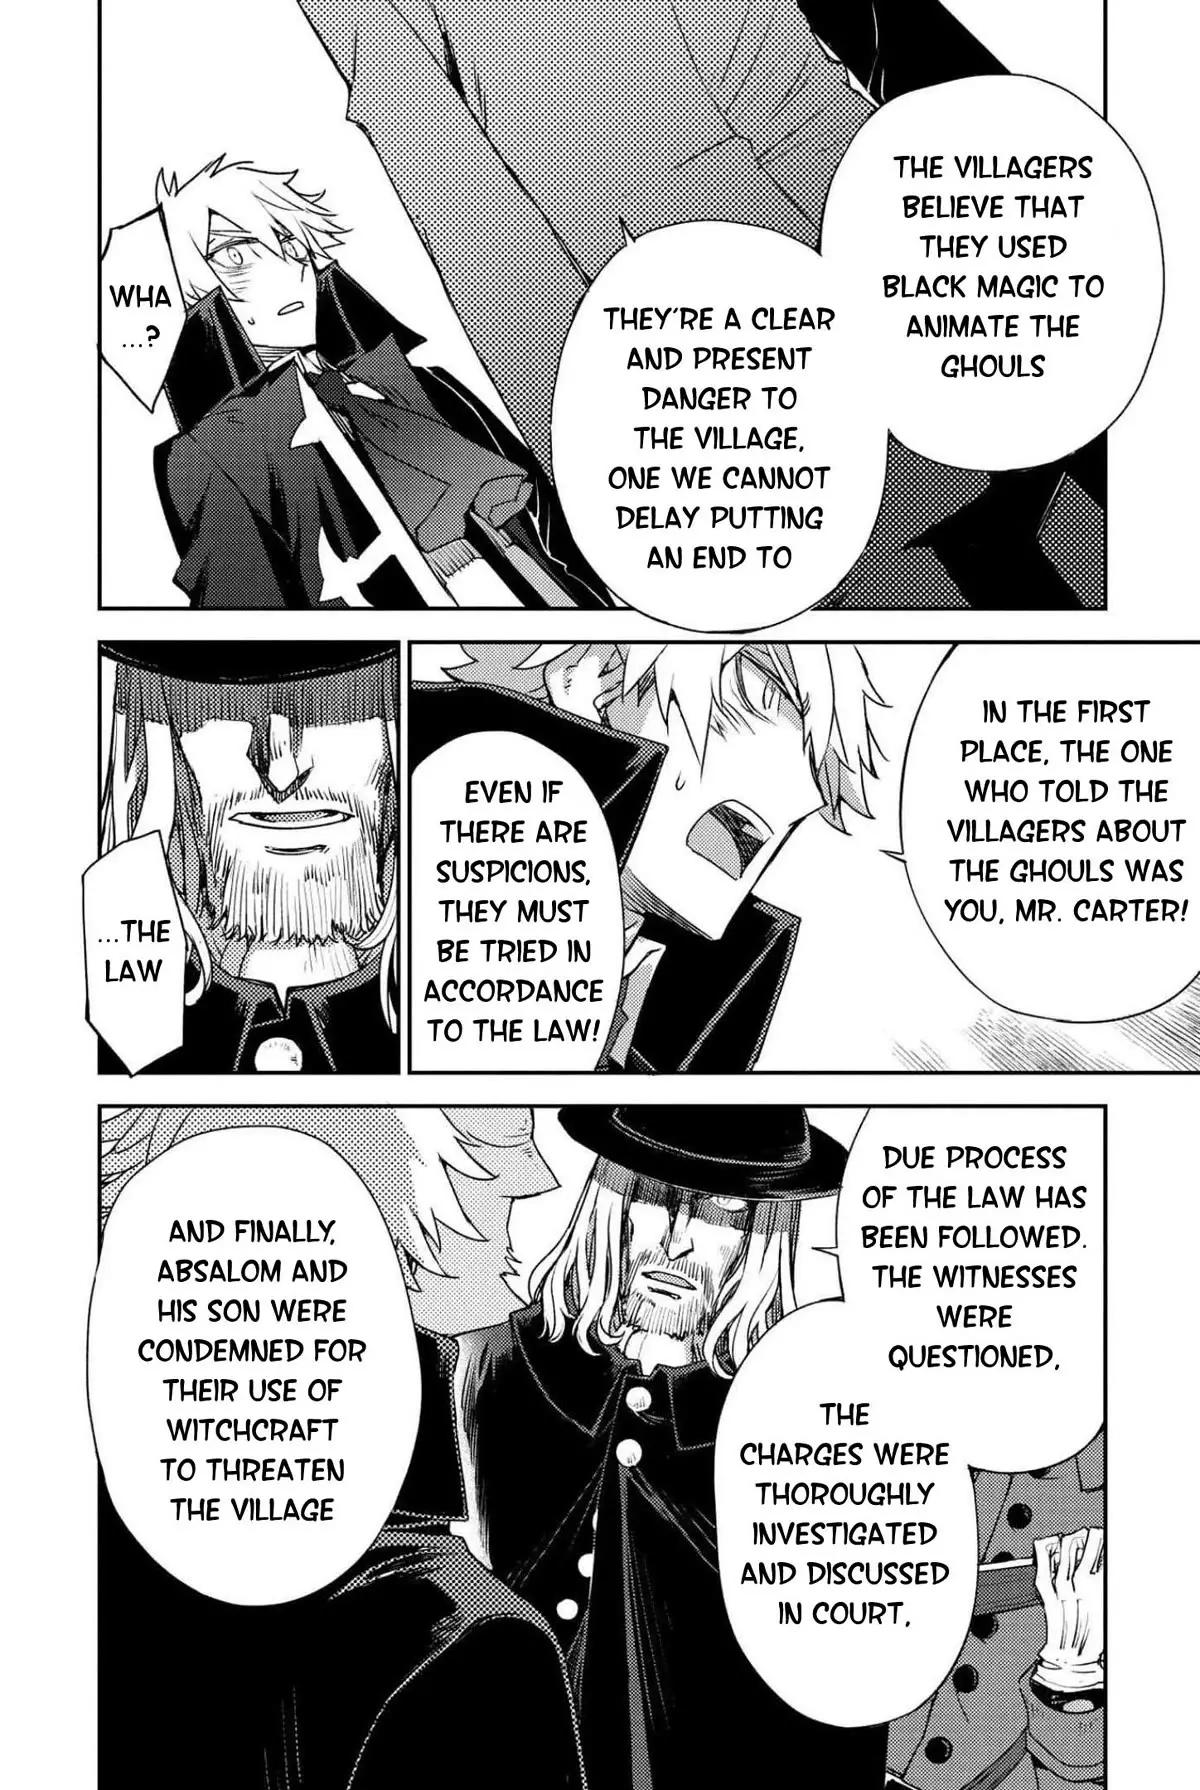 Fate/grand Order: Epic Of Remnant - Subspecies Singularity Iv: Taboo Advent Salem: Salem Of Heresy - 23 page 10-eccd30db